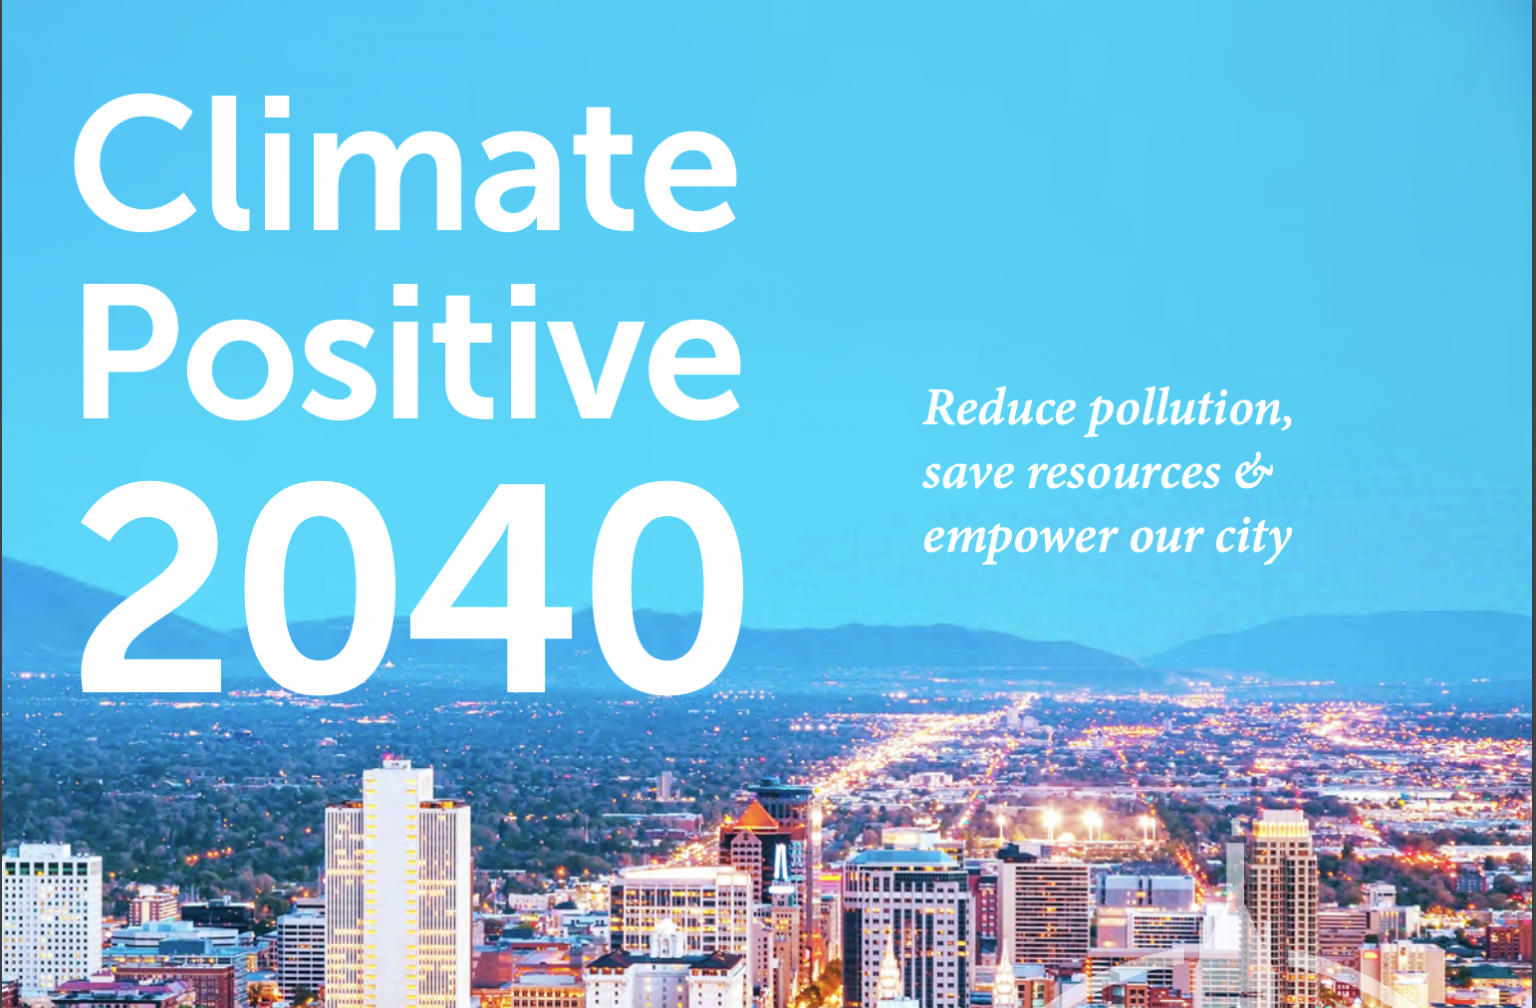 Utah Climate Action Network